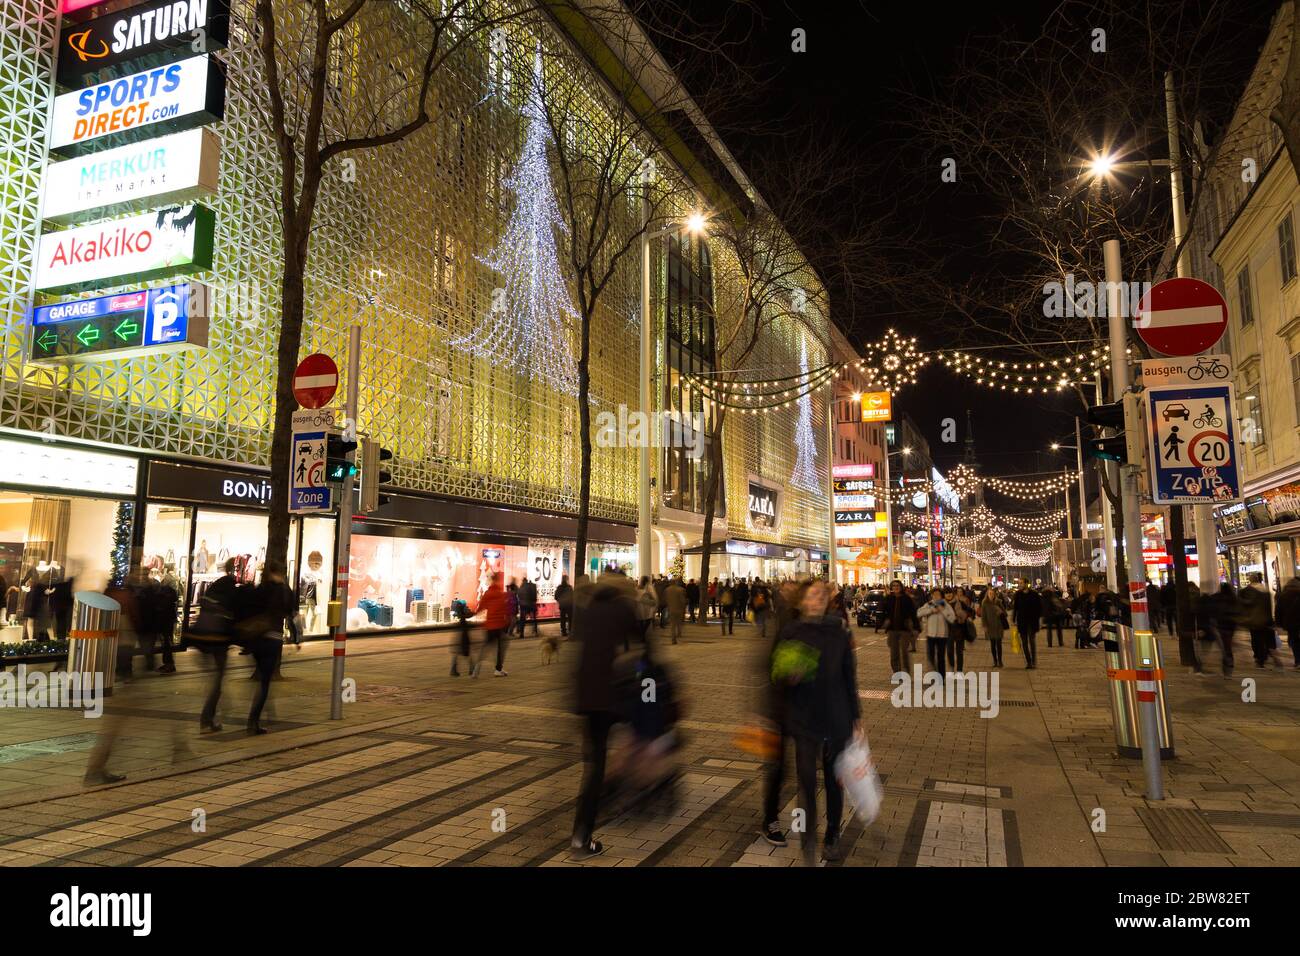 VIENNA, AUSTRIA - 4TH DECEMBER 2015: A view along Mariahilferstrasse at night showing the Christmas atmosphere. Lots of people can be seen. Stock Photo